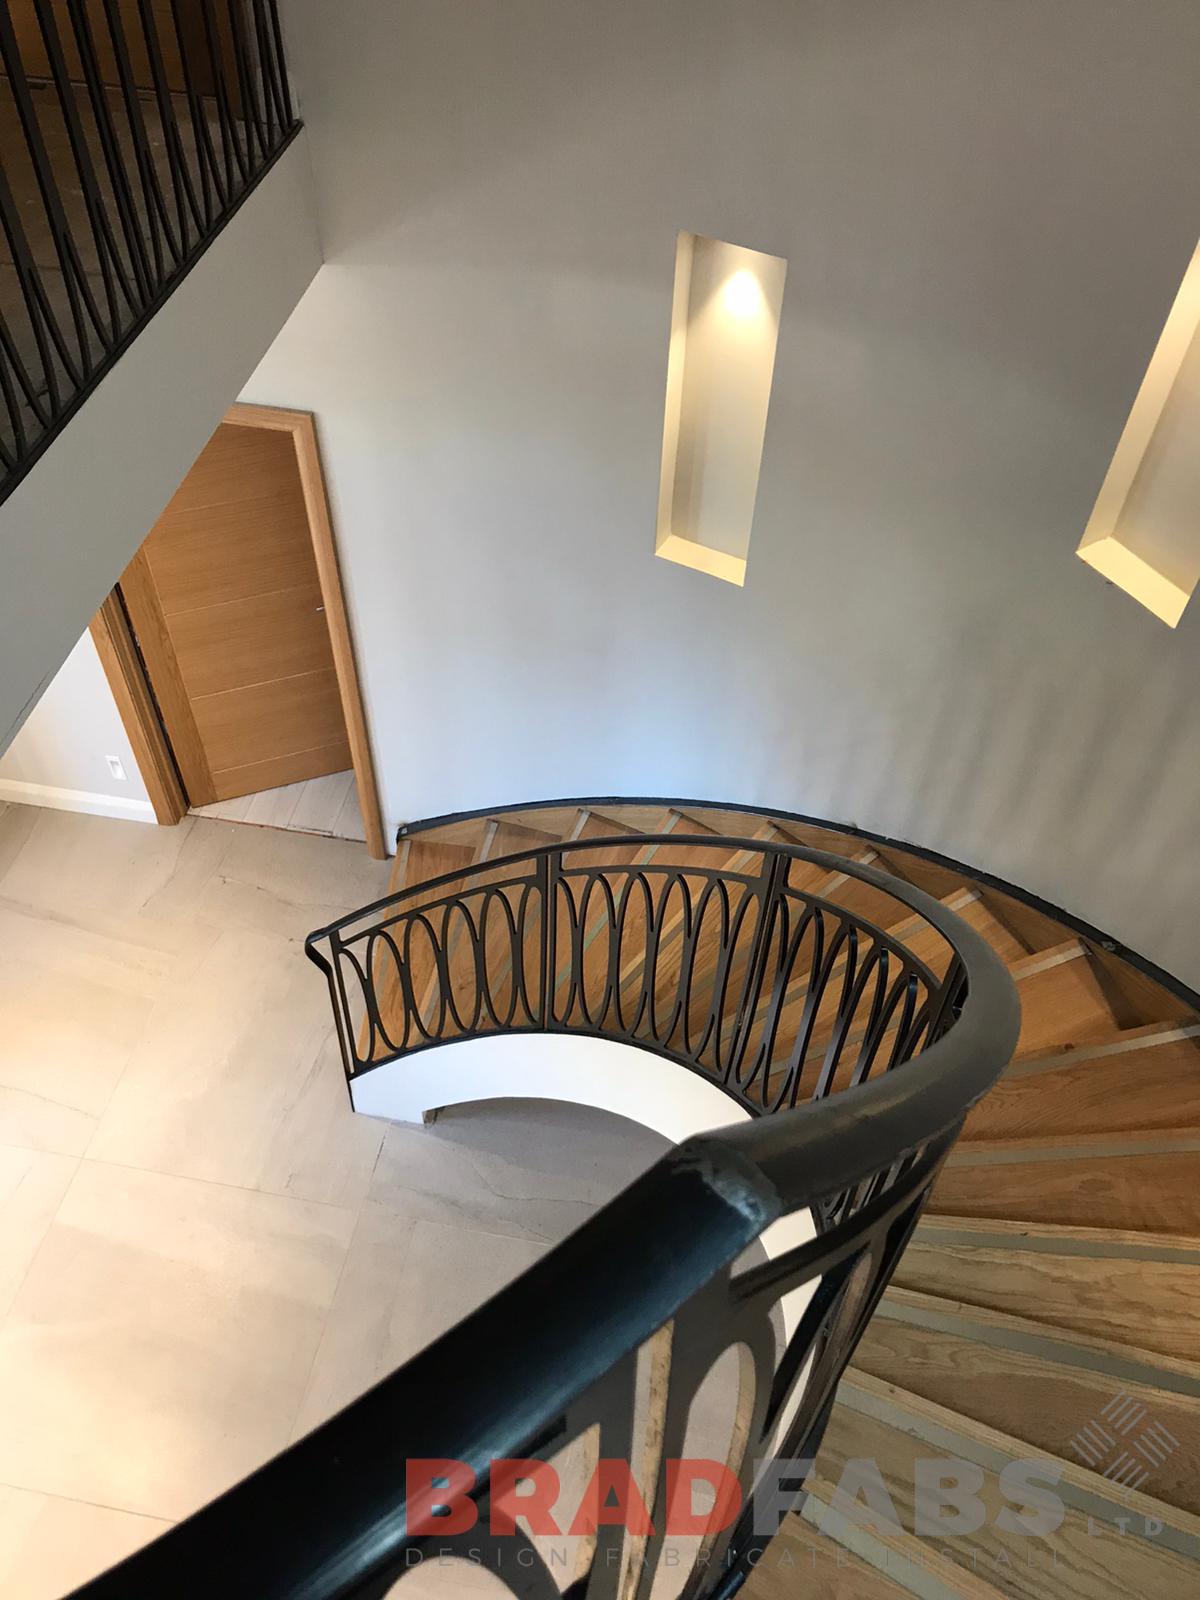 Bespoke internal helical staircase for a domestic property with laser cut feature balustrade in mild steel and powder coated black by bradfabs